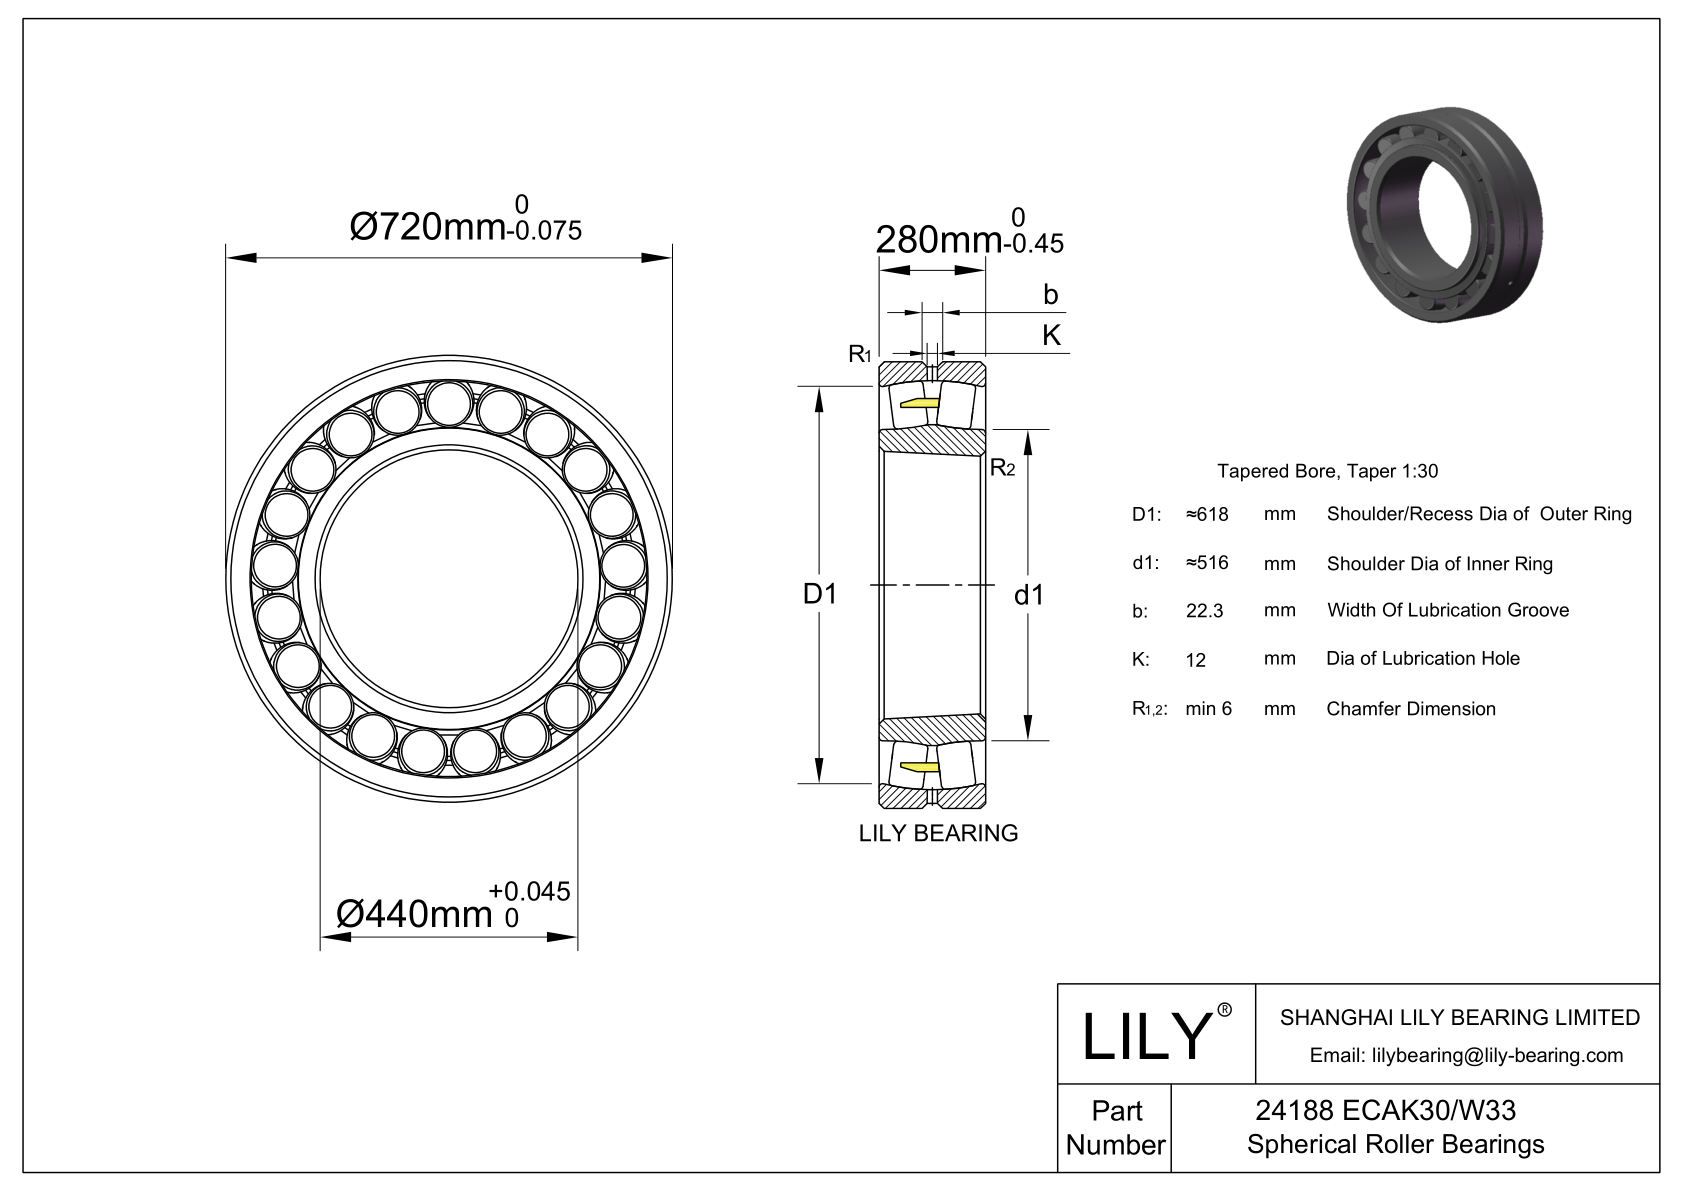 24188 ECAK30/W33 Double Row Spherical Roller Bearing cad drawing